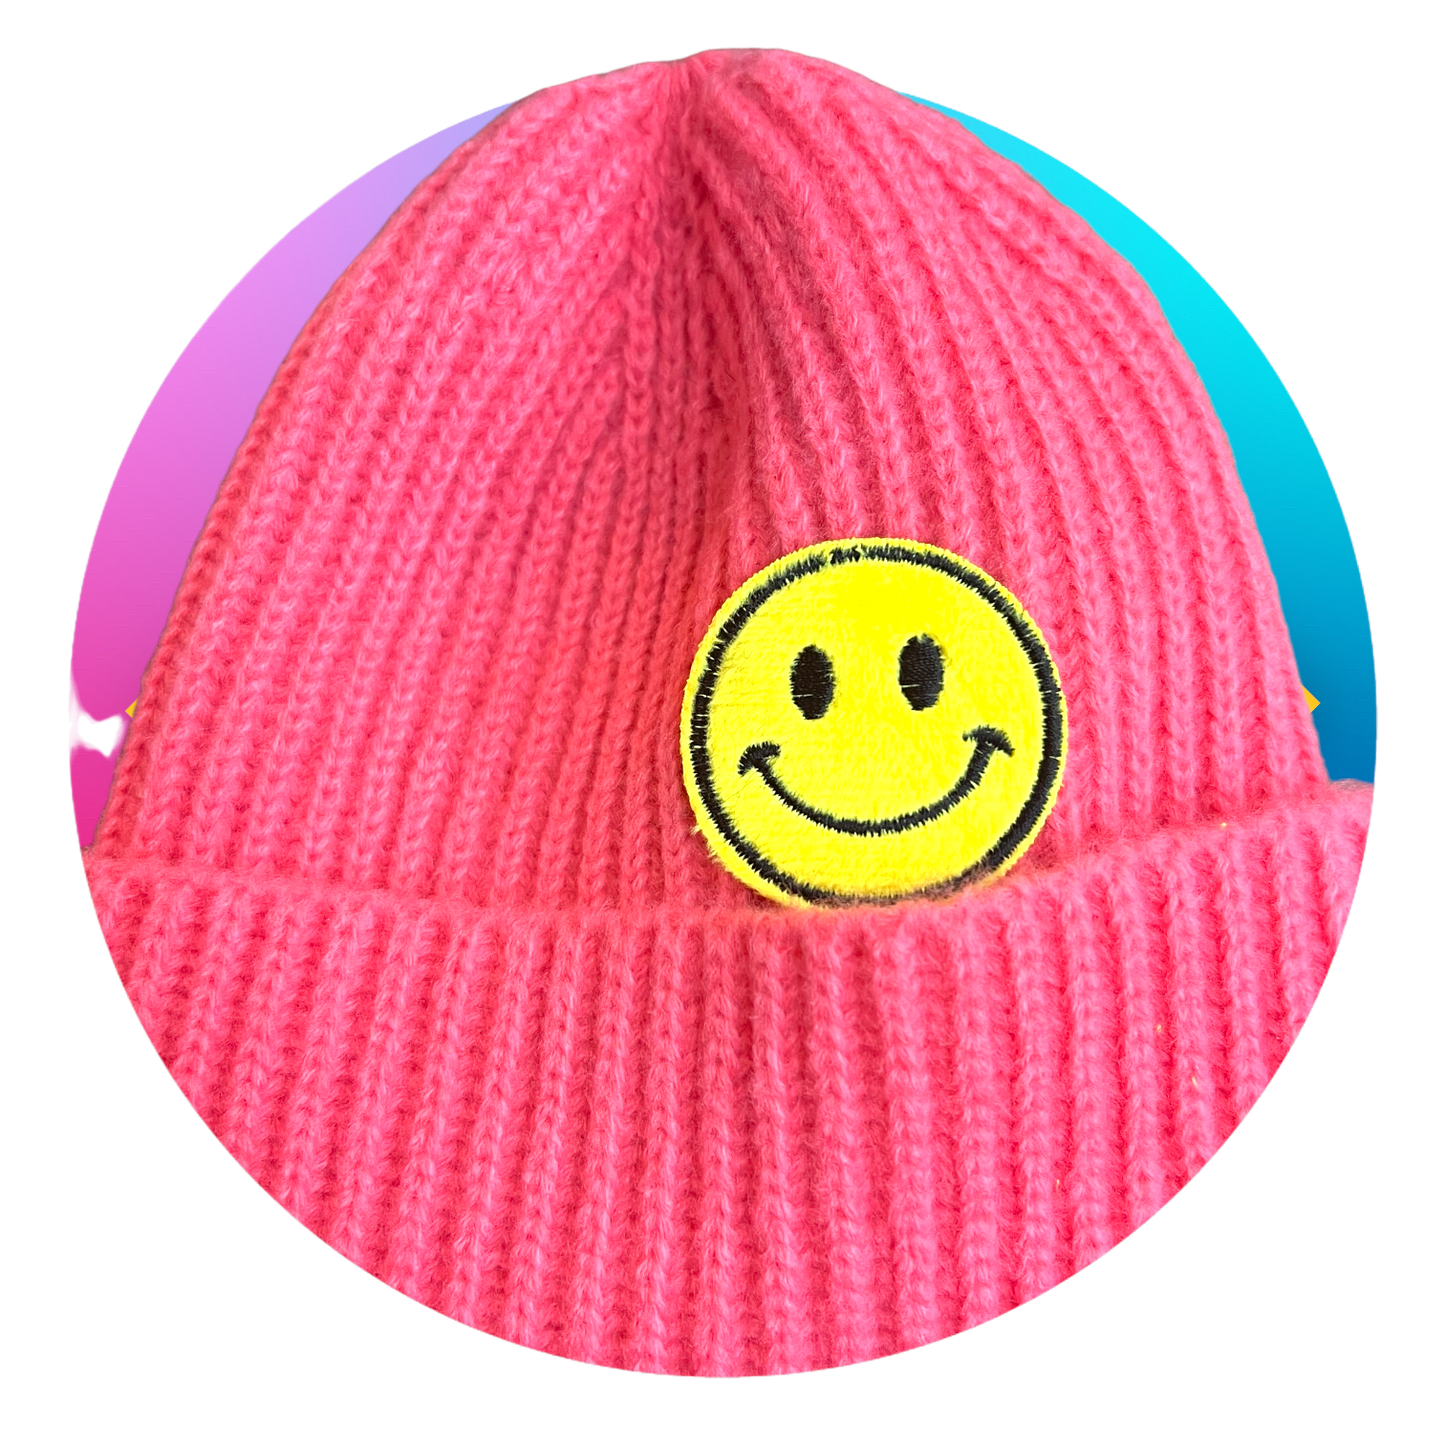 Child Beanies - One Size Fits